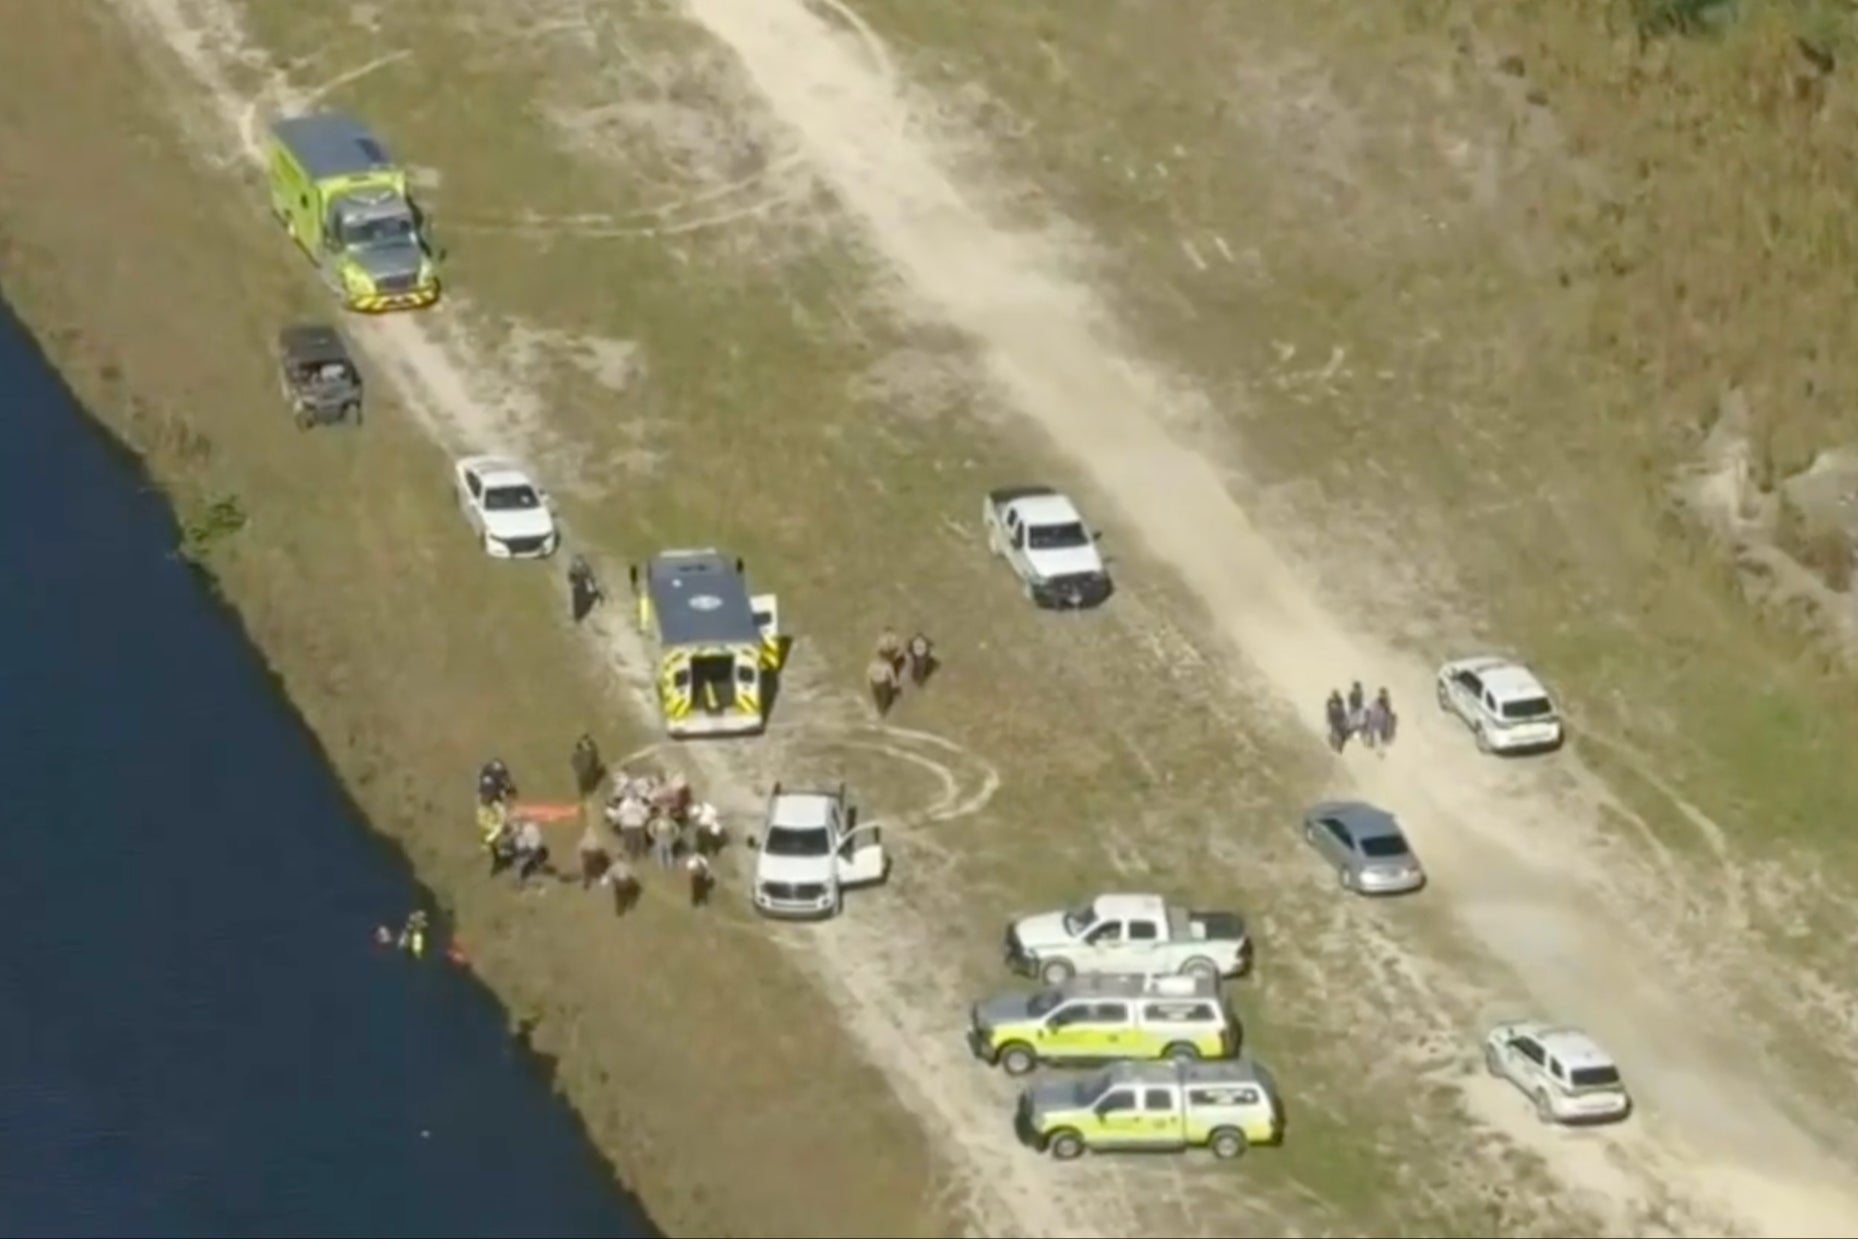 Man dies and woman hospitalized after helicopter crash in Miami, Florida